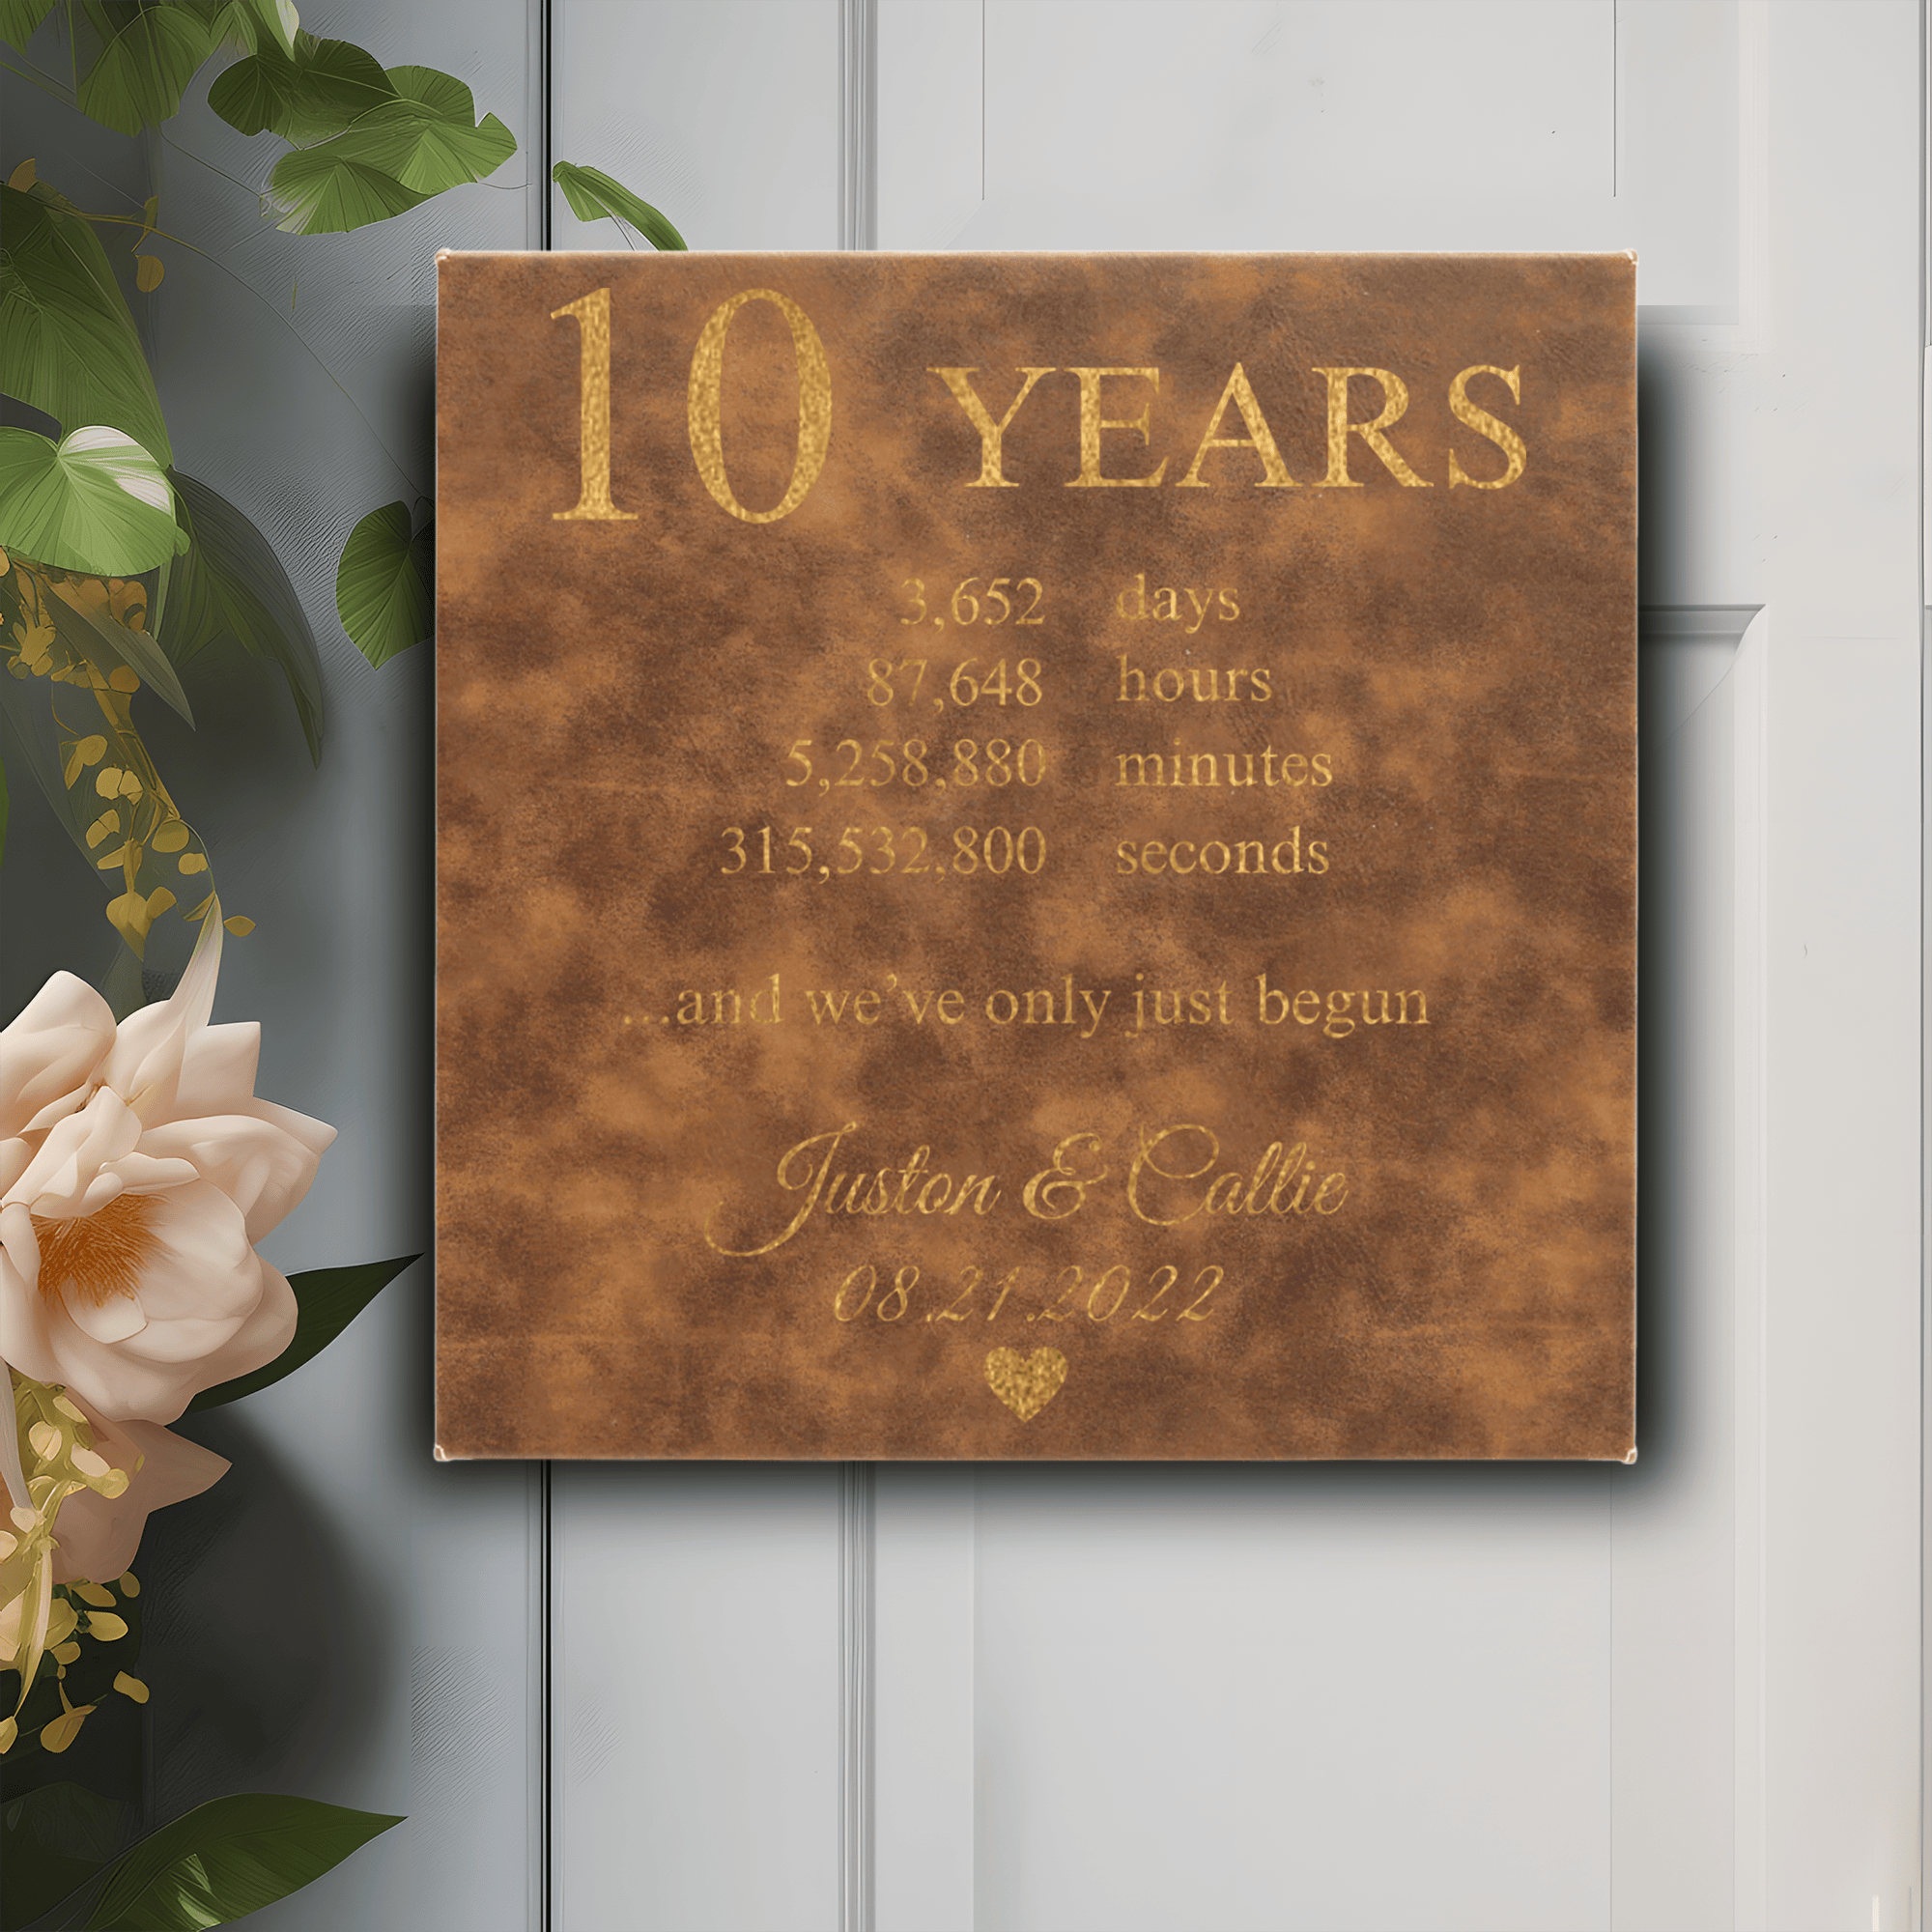 Rustic Gold Leather Wall Decor With 10 Year Anniversary Design